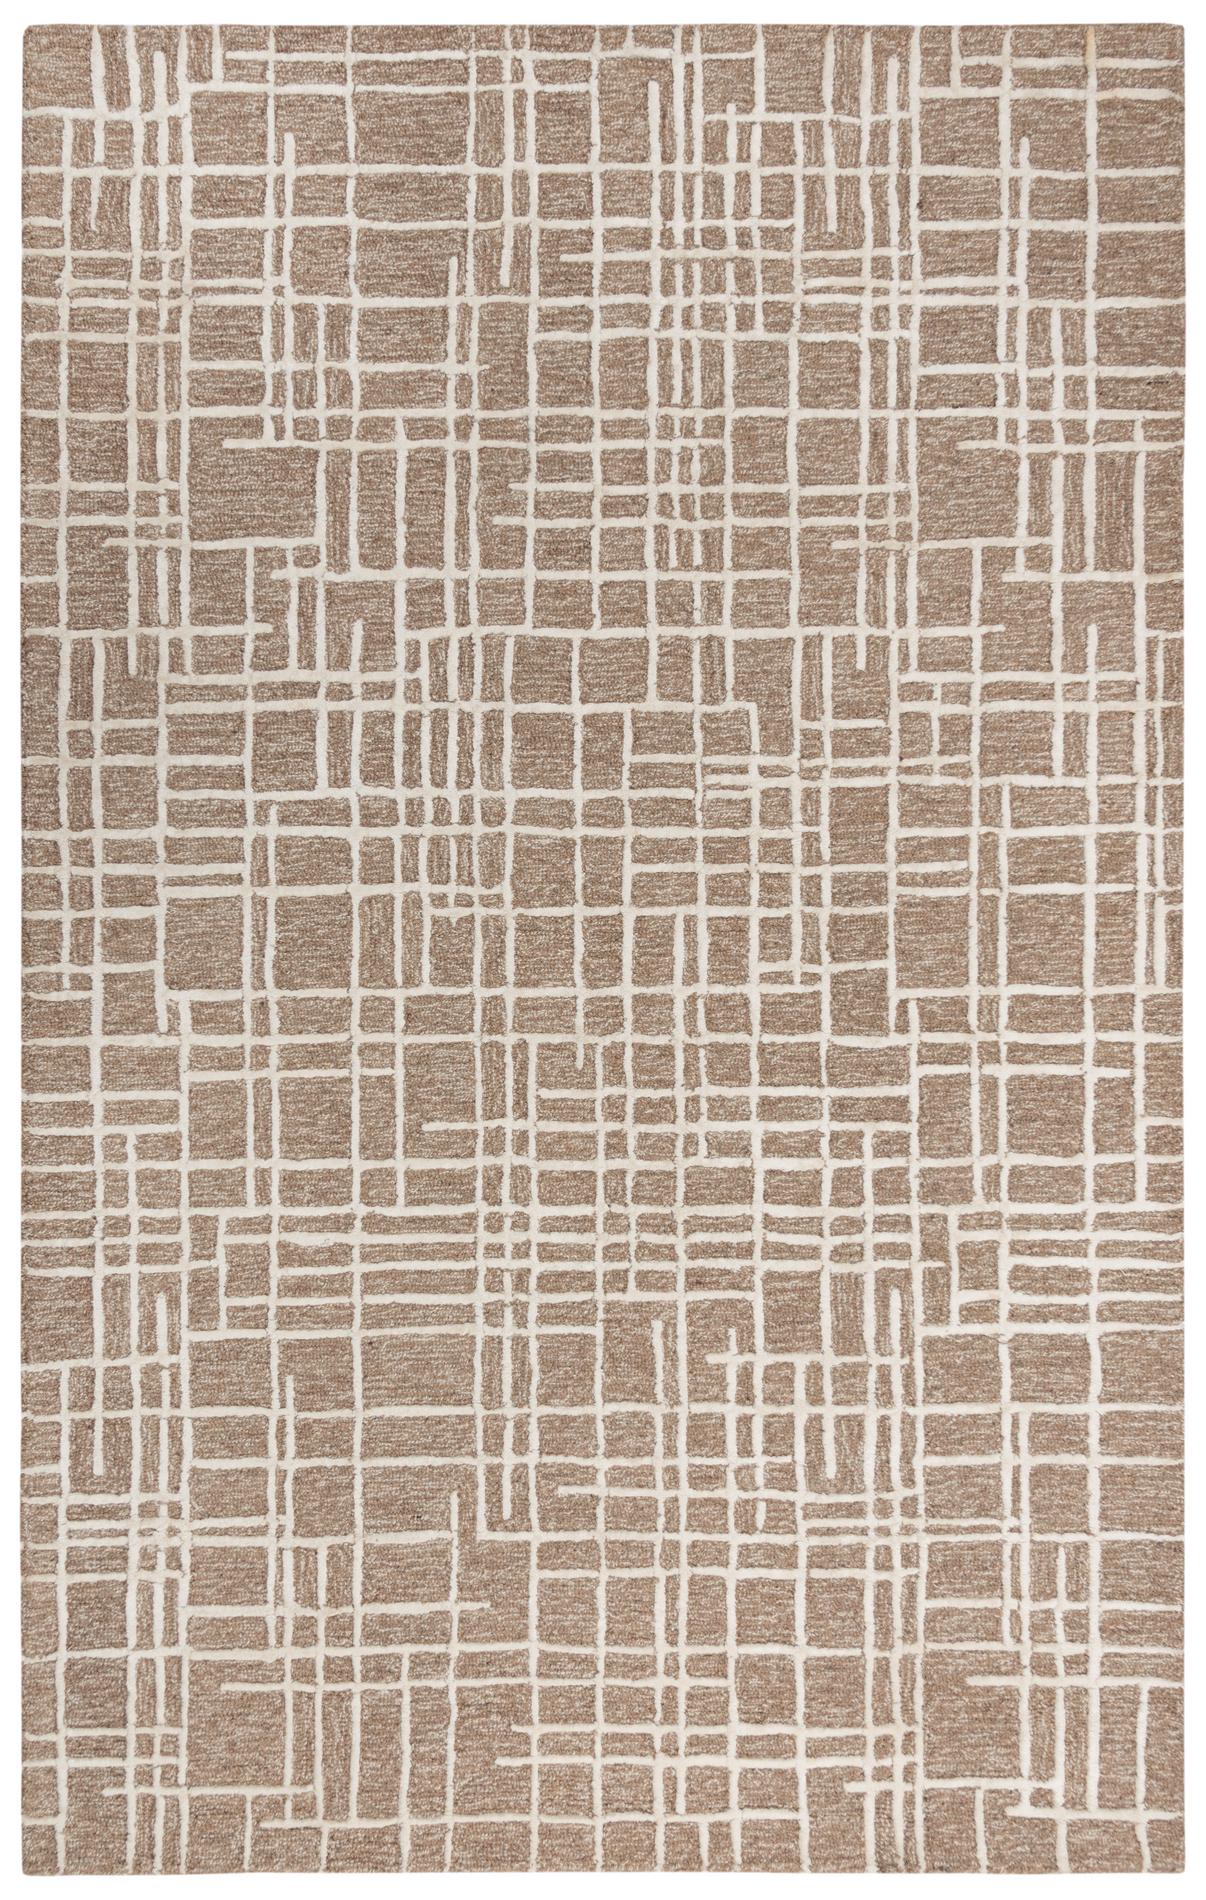 Rizzy Jazz Jzz974 Brown/Natural Area Rug